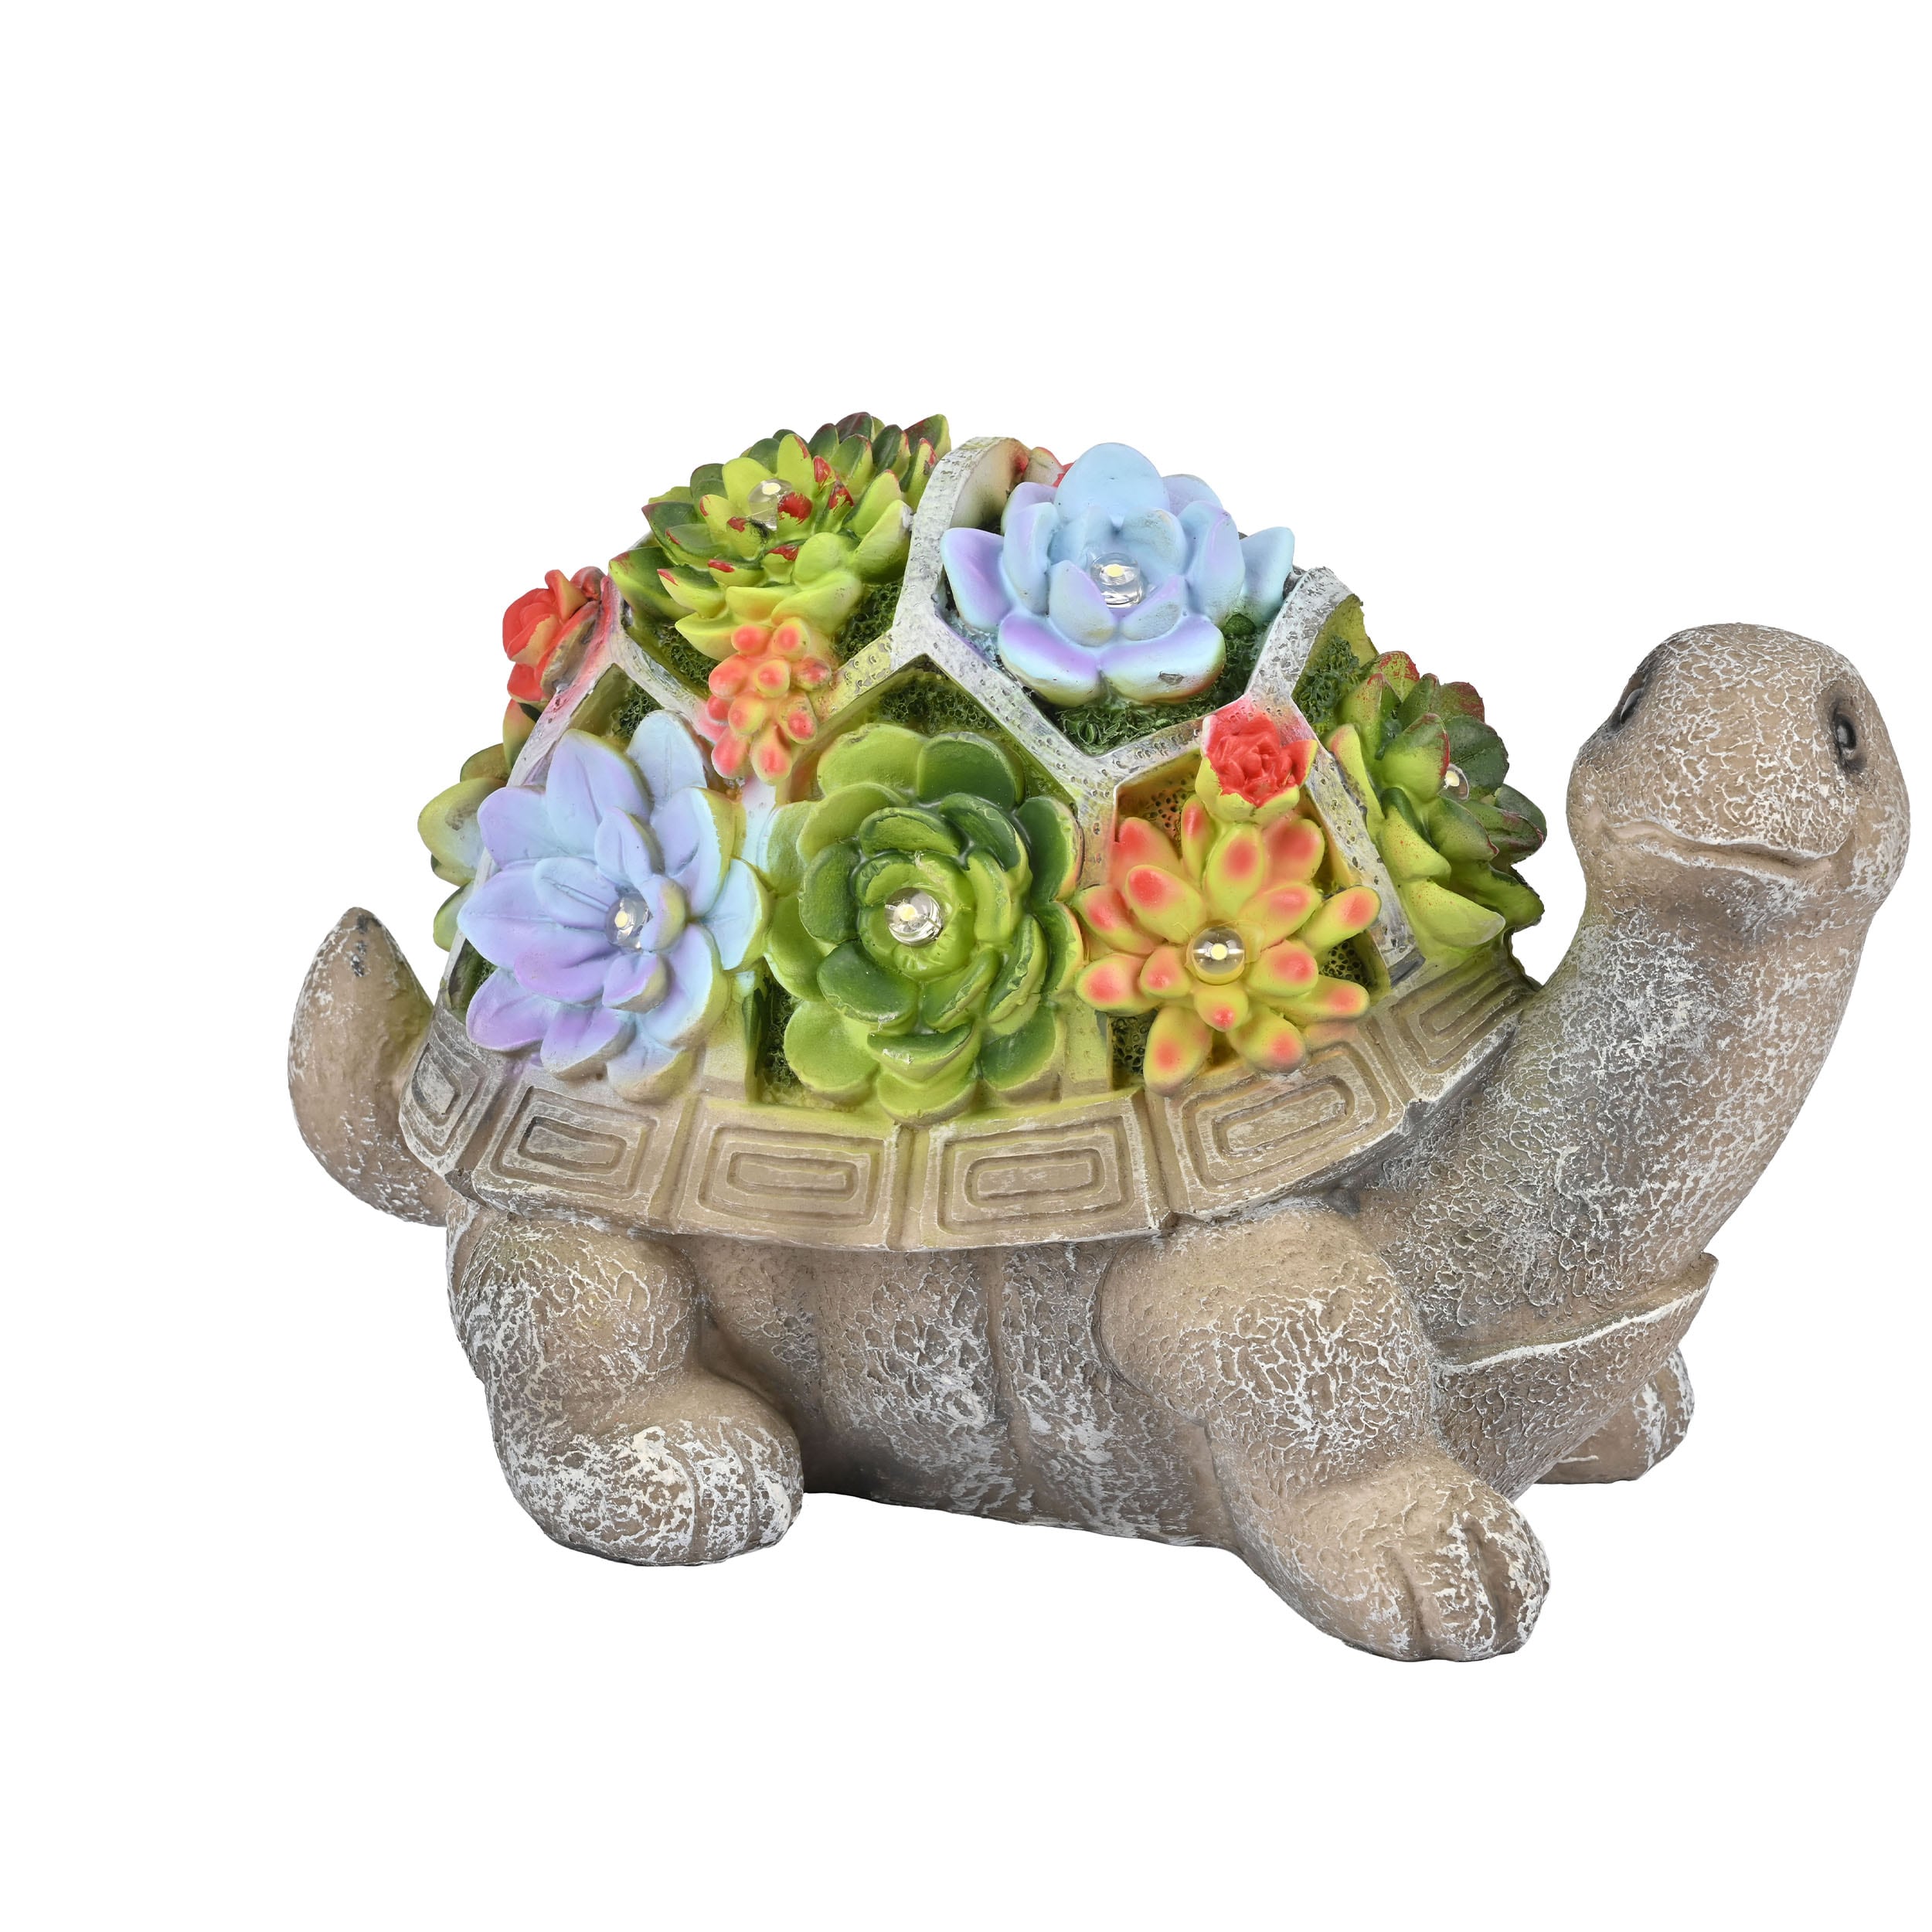 Home Garden Decor Turtle Outdoor With FLower Art Multi Color Big Size Used 